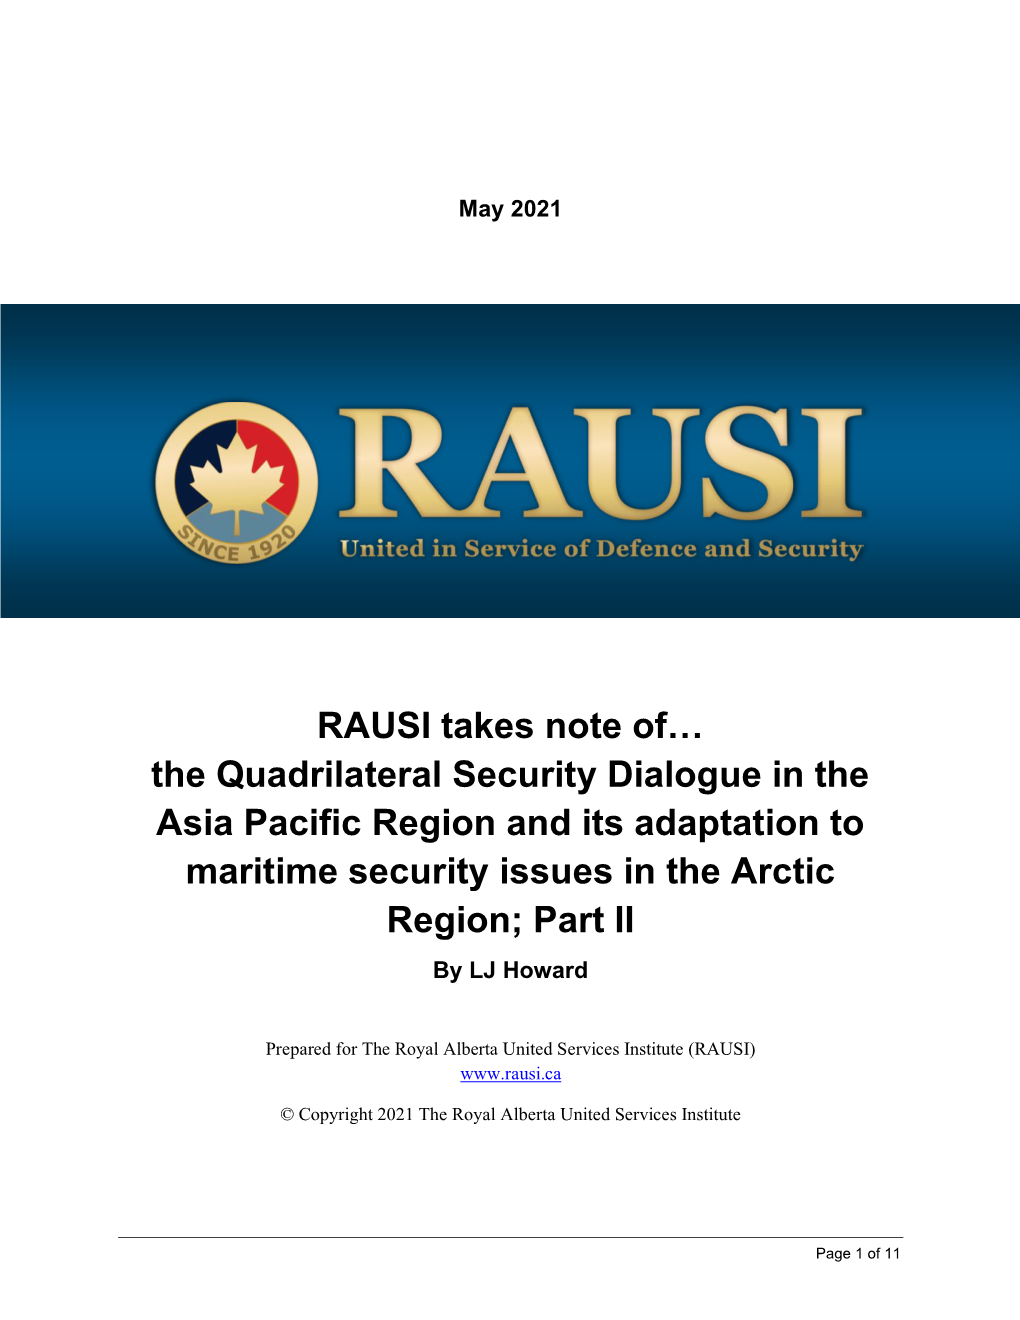 RAUSI Takes Note Of… the Quadrilateral Security Dialogue In